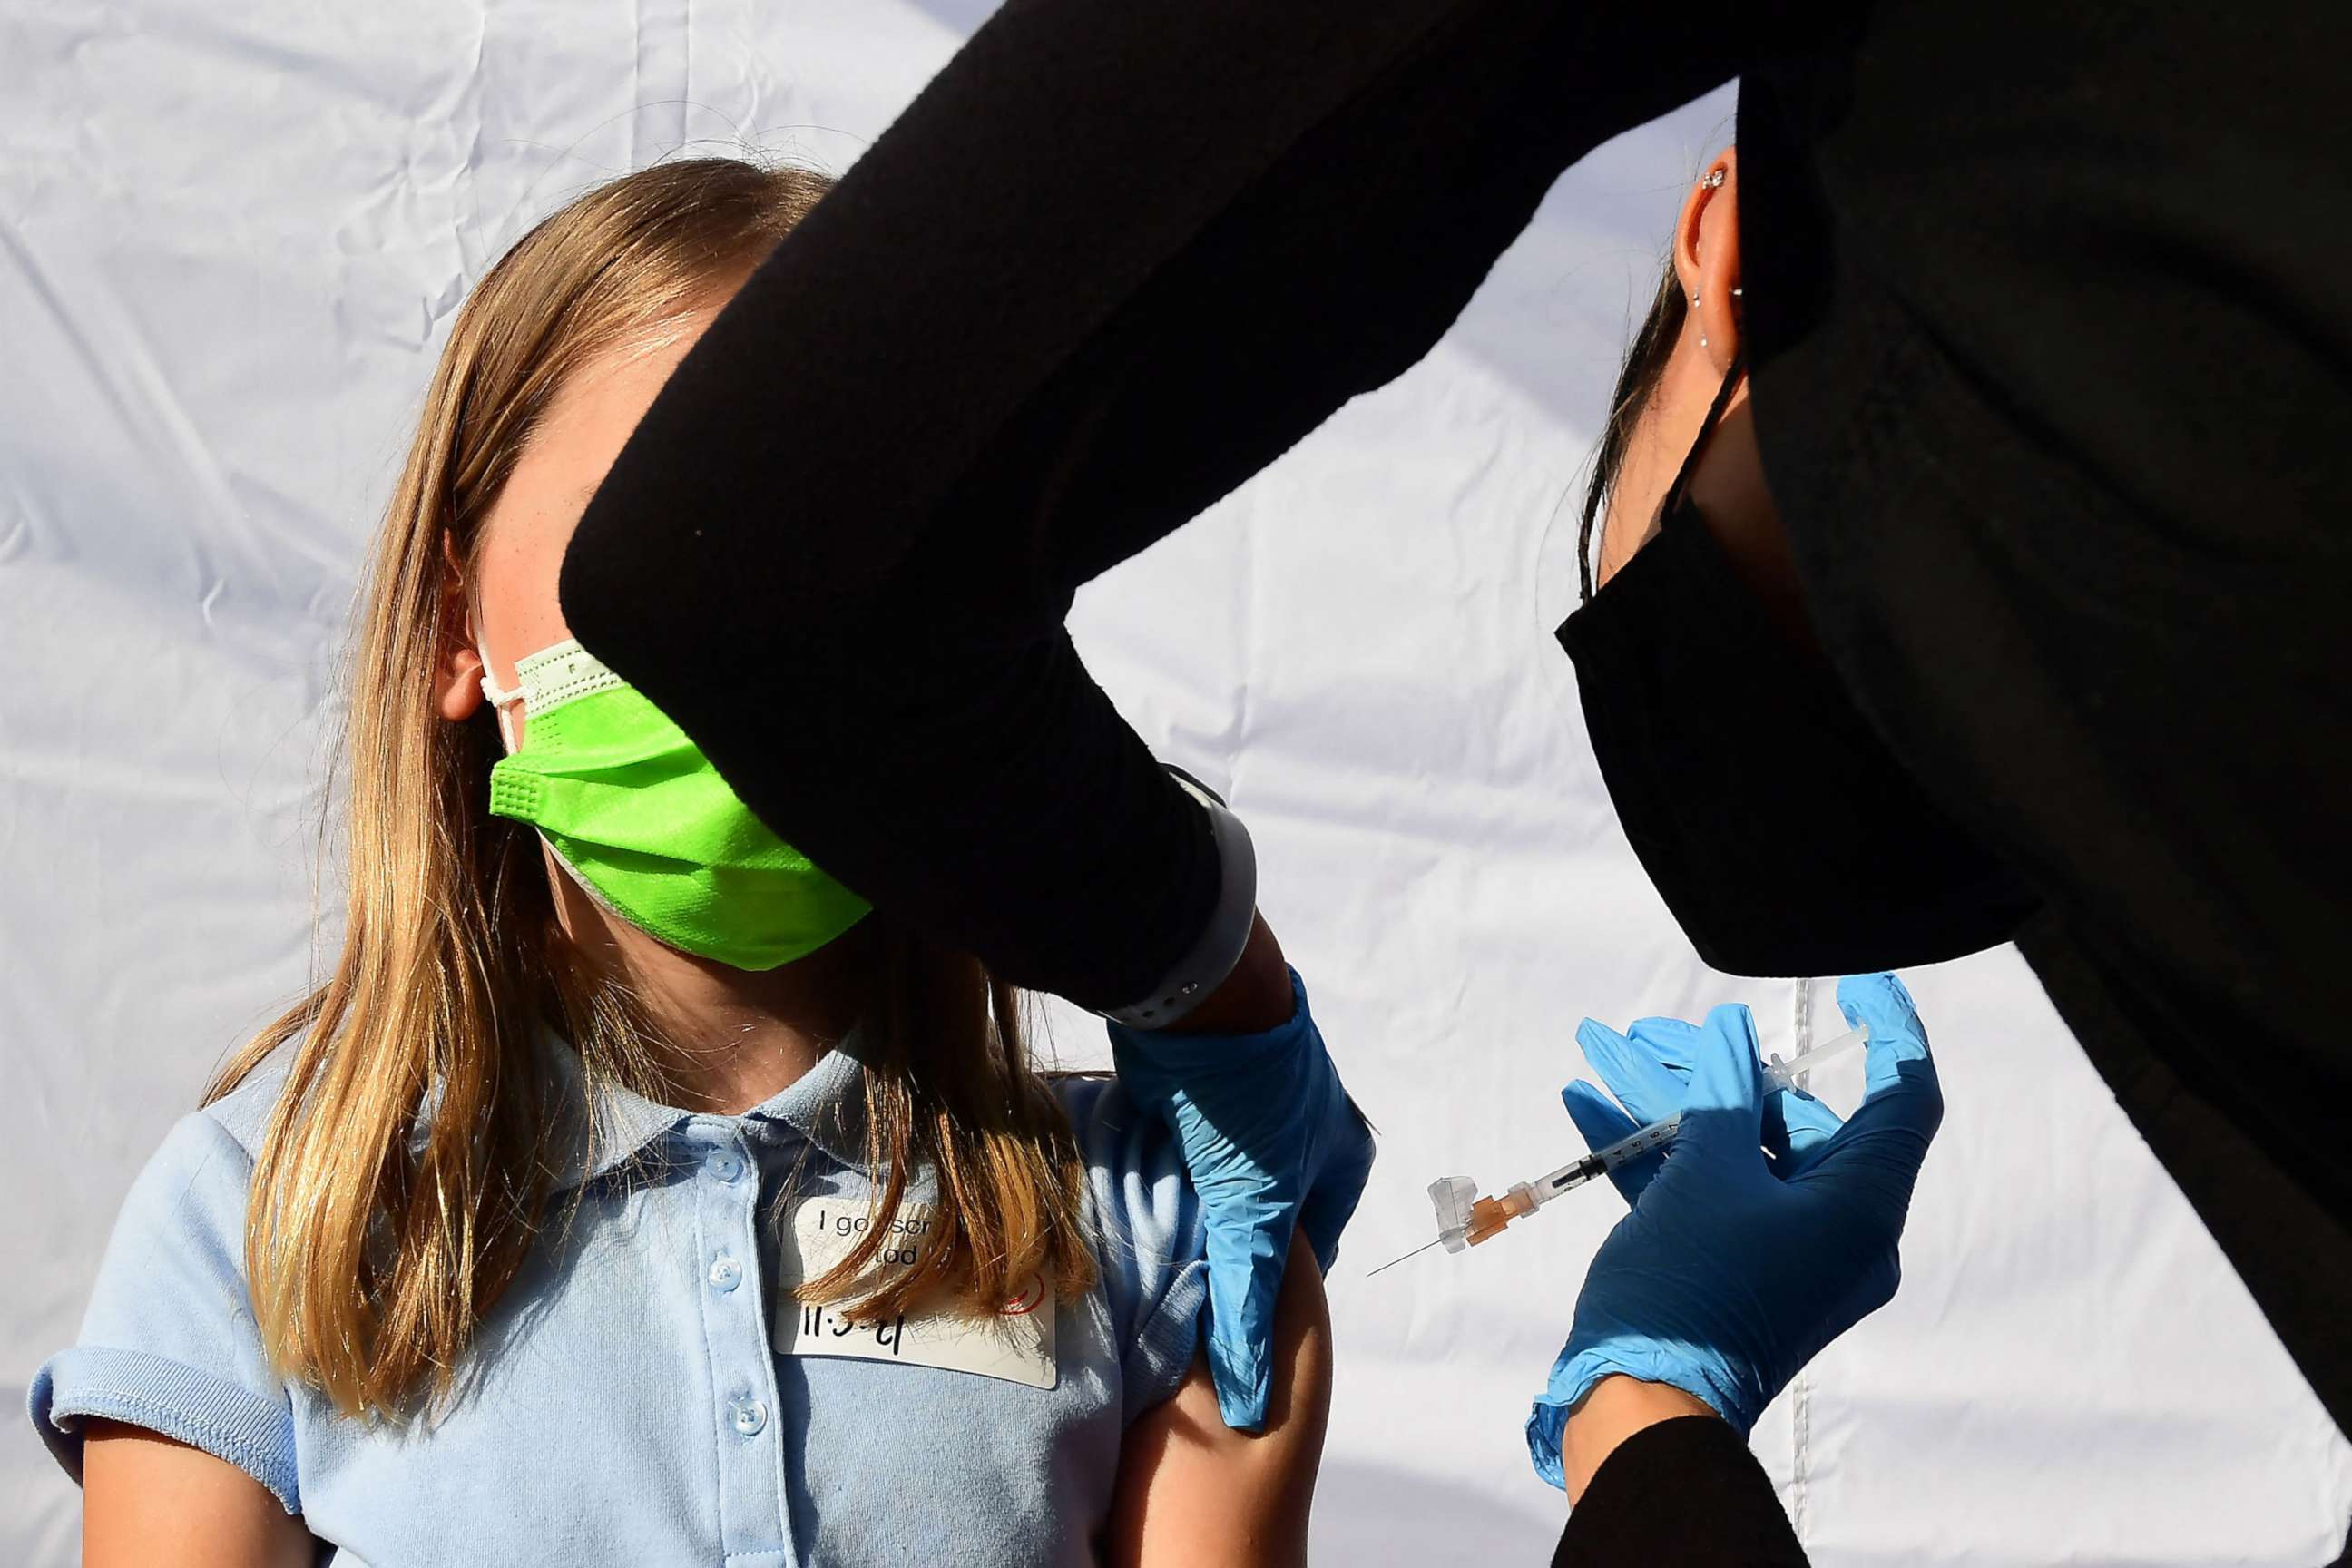 PHOTO: A child receives a dose of Pfizer's Covid-19 vaccine at an event launching school vaccinations in Los Angeles, Nov. 5, 2021.